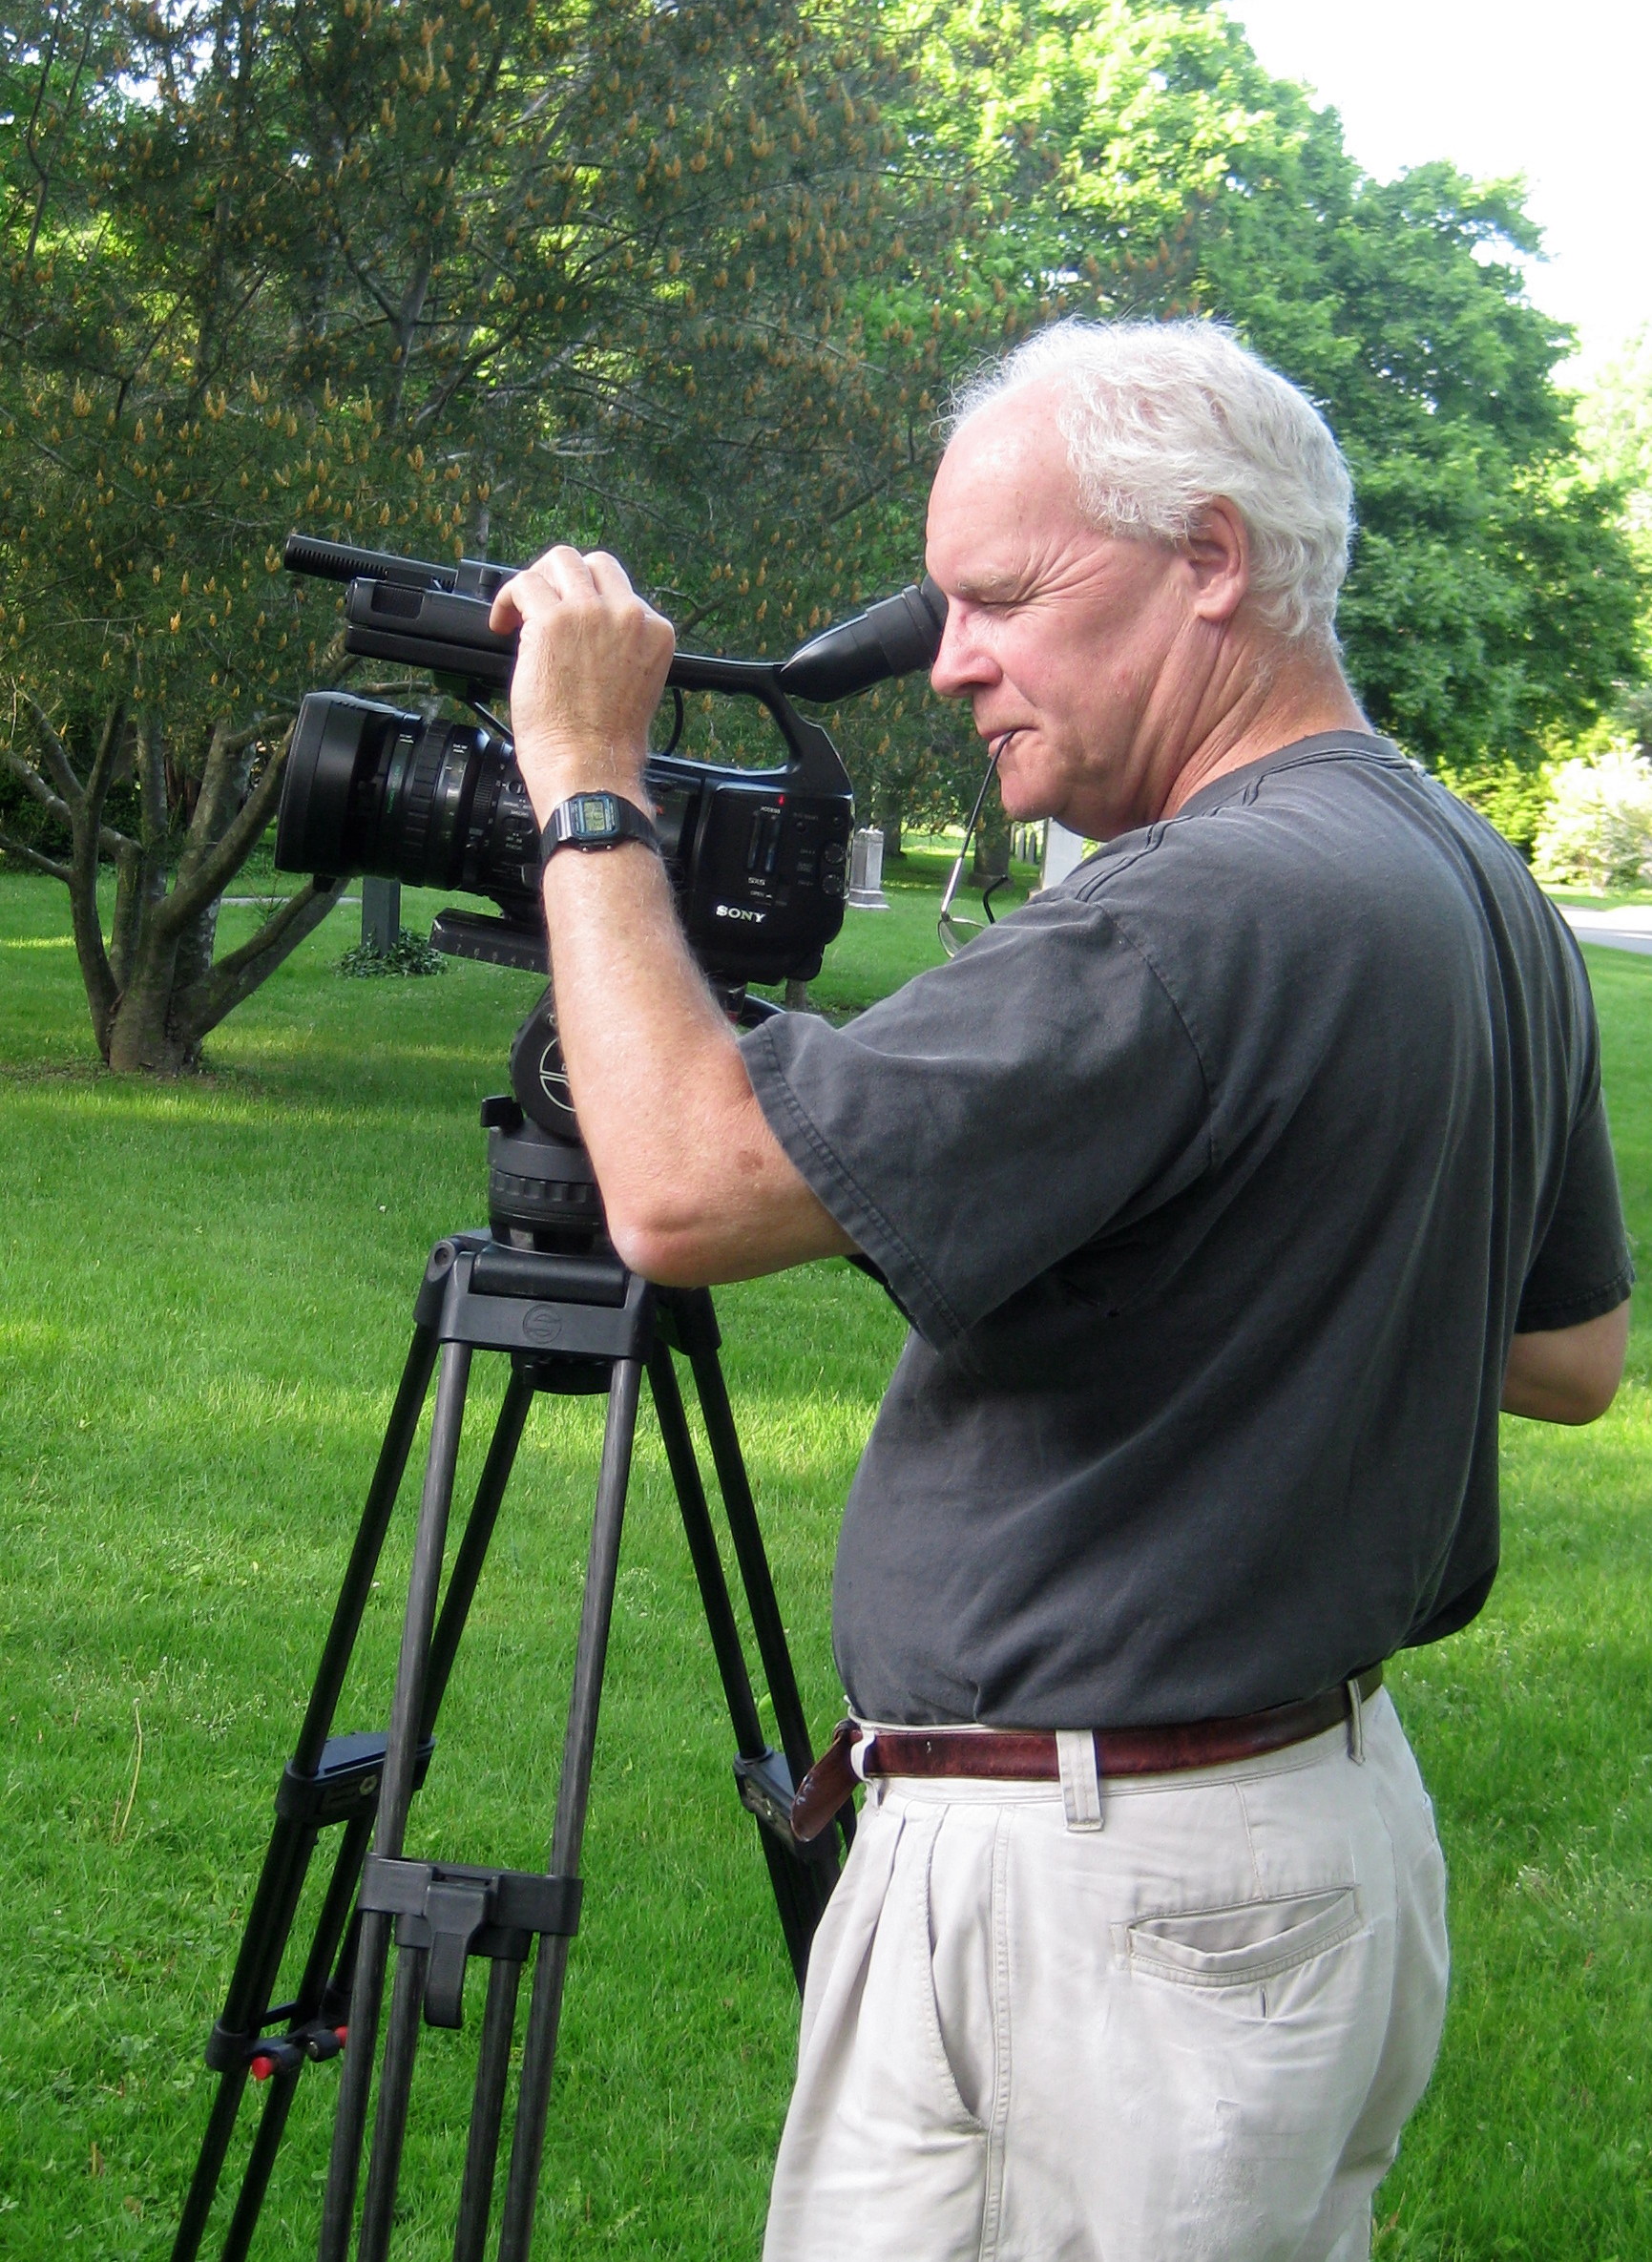 Director/Cinematographer Ross Spears filming at Mt. Auburn Cemetery in Cambridge, MA during the making of THE TRUTH ABOUT TREES in 2012.